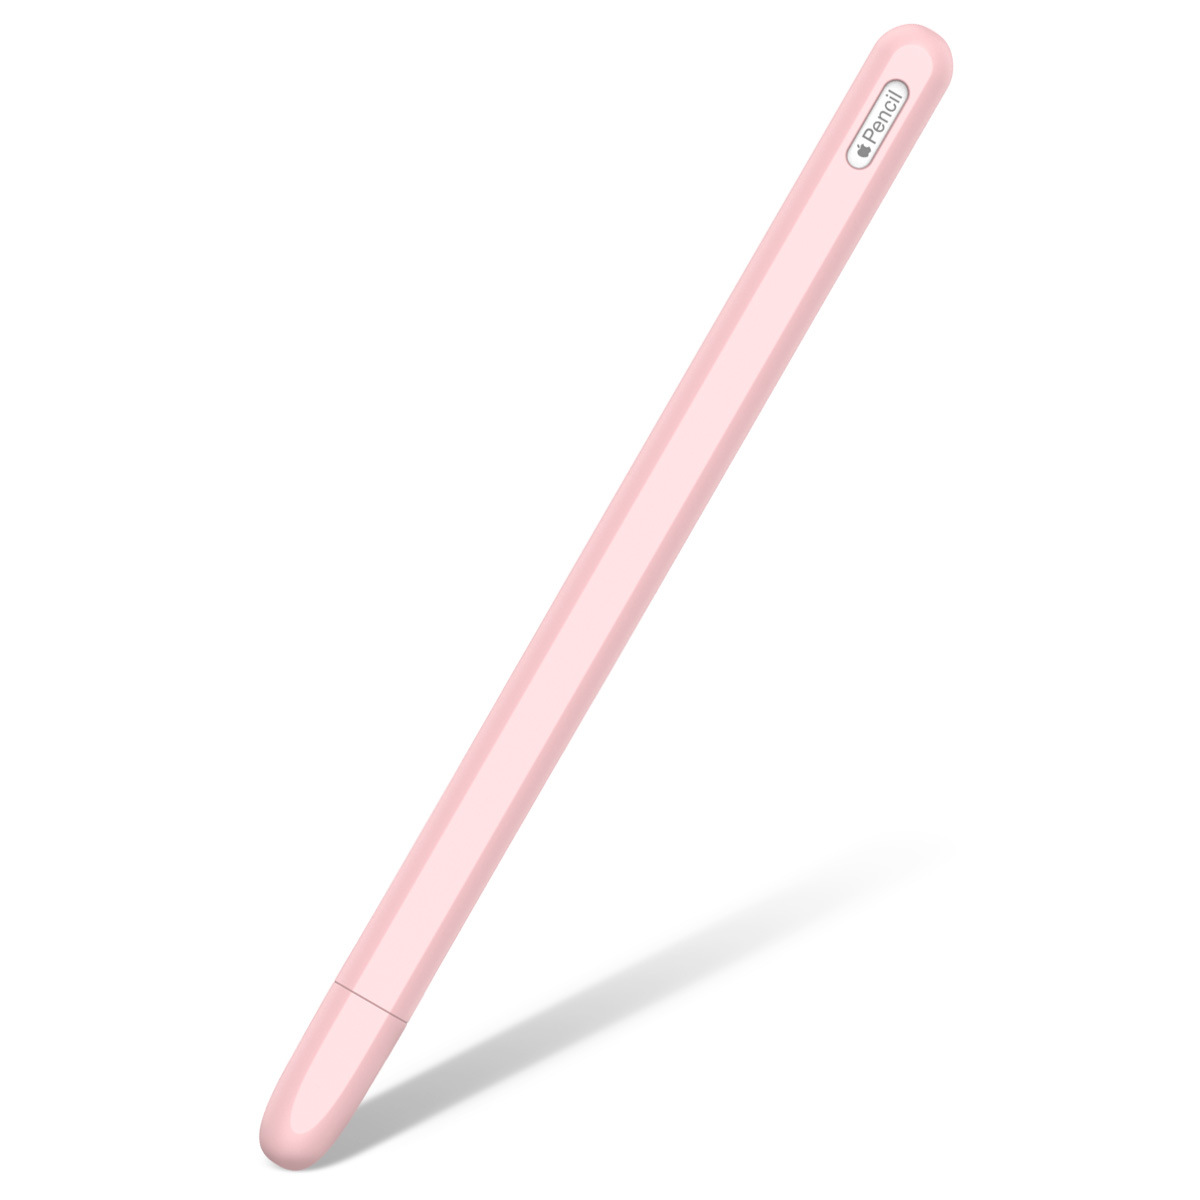 Bakeey-Anti-slip-Anti-fall-Silicone-Touch-Screen-Stylus-Pen-Protective-Case-for-Apple-Pencil-2nd-Gen-1593573-10